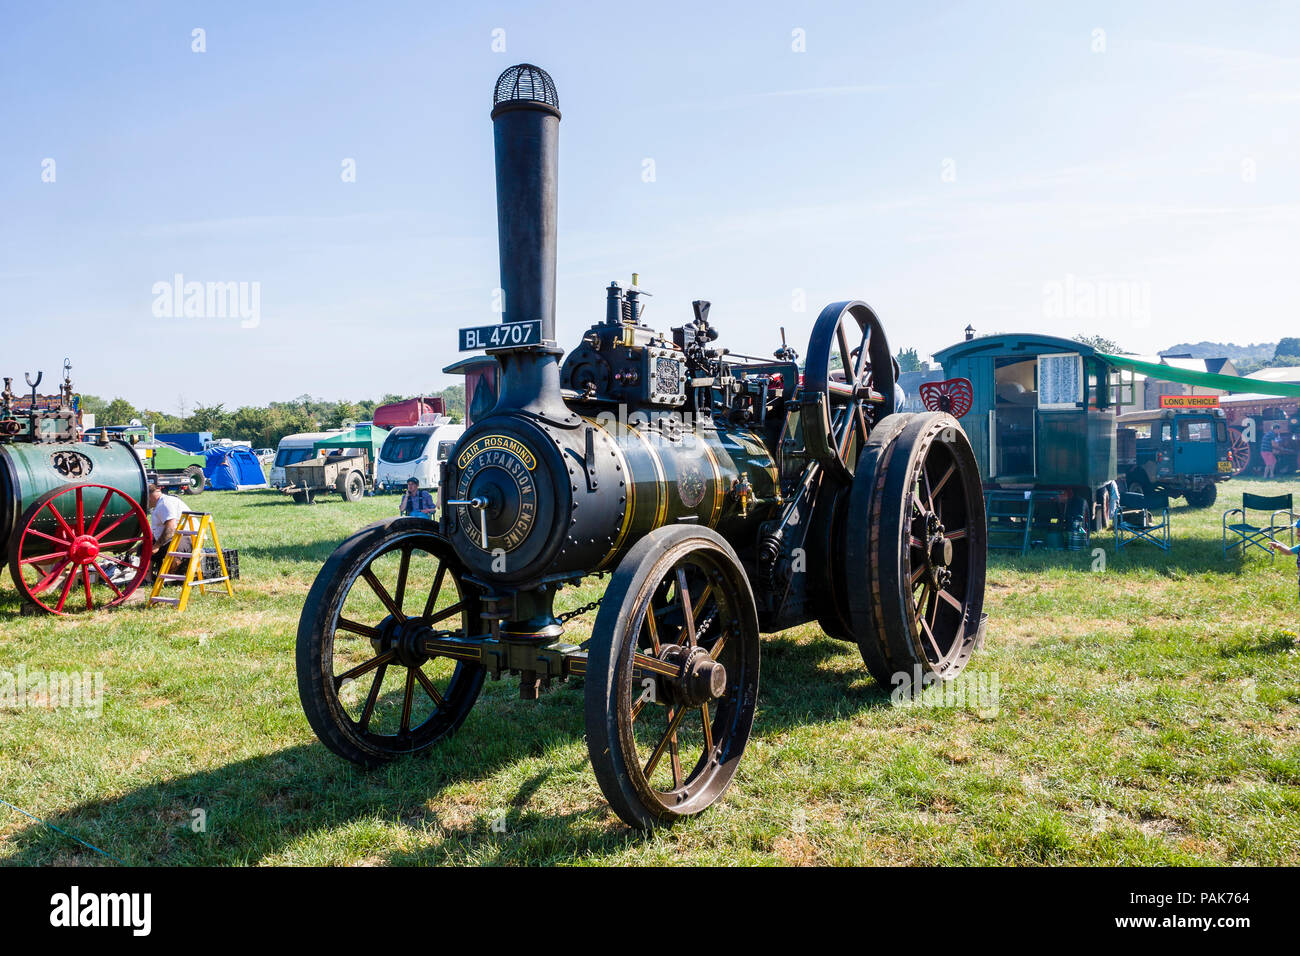 FAIR ROSAMUND a general purpose steam traction engine by Wallis & Steevens operating at Heddingto steam fair in Wiltshire England UK in 2018 Stock Photo